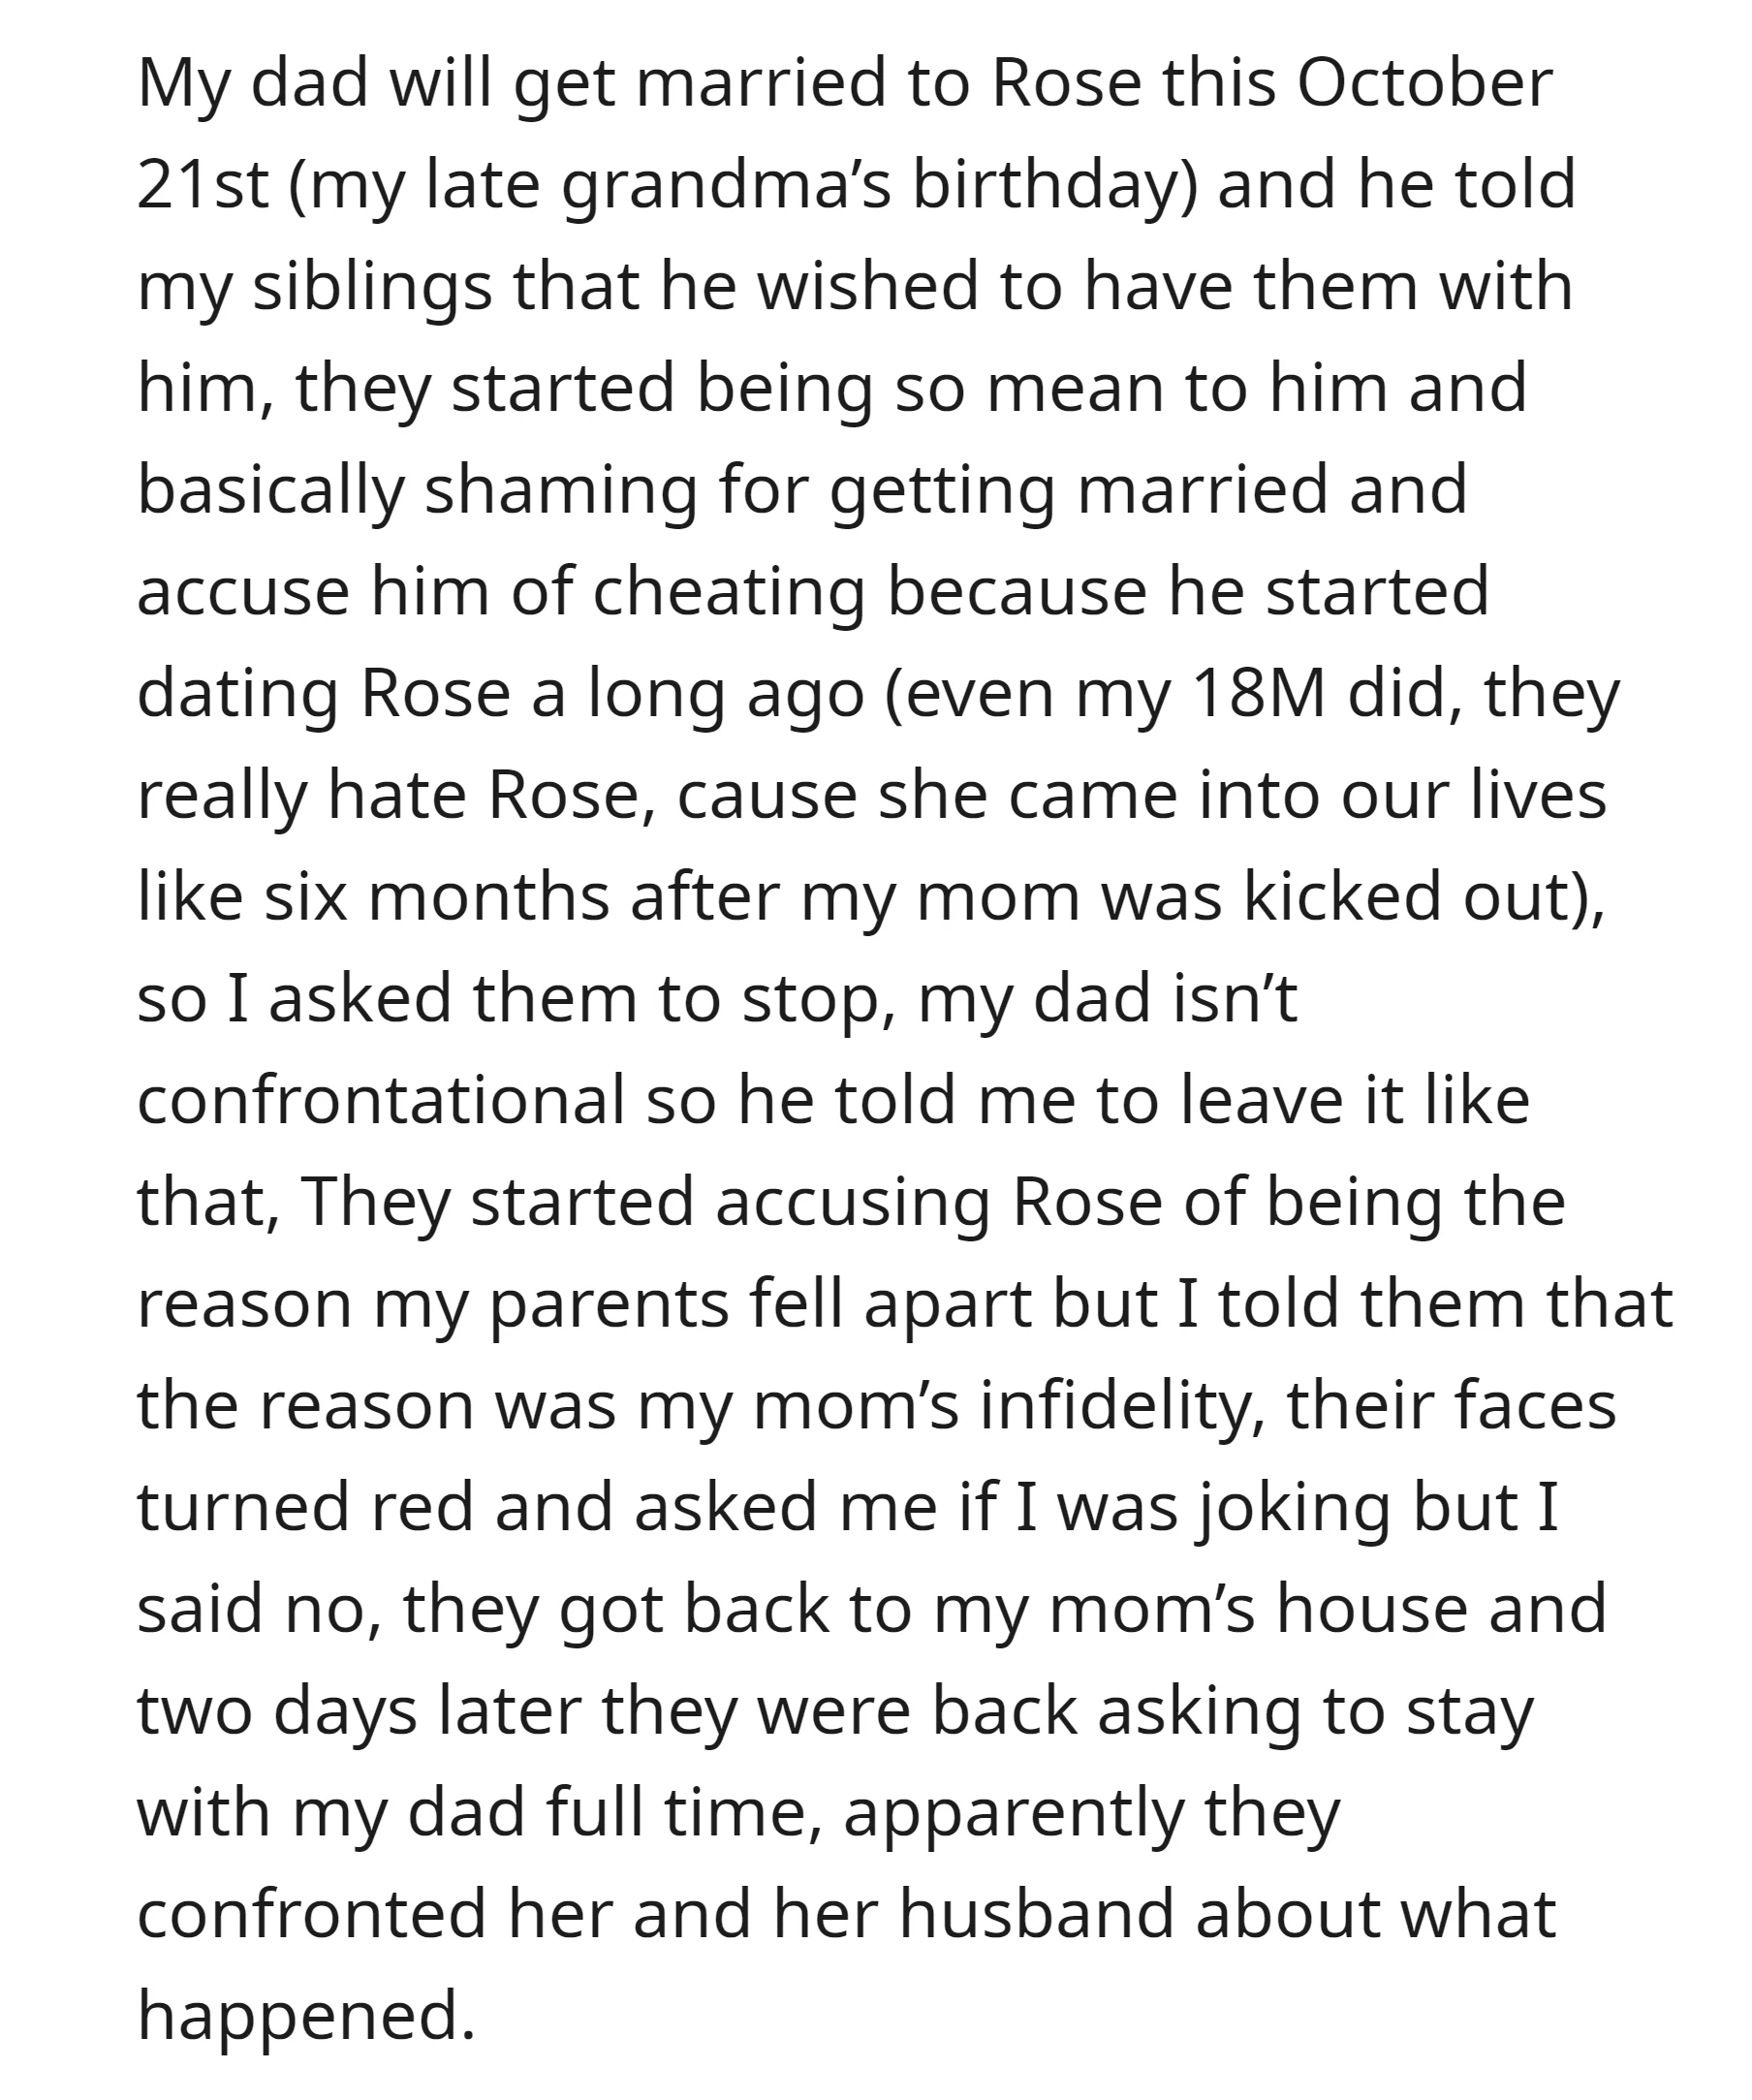 OP's siblings sought to live with their dad full time after learning the truth about their mother's infidelity